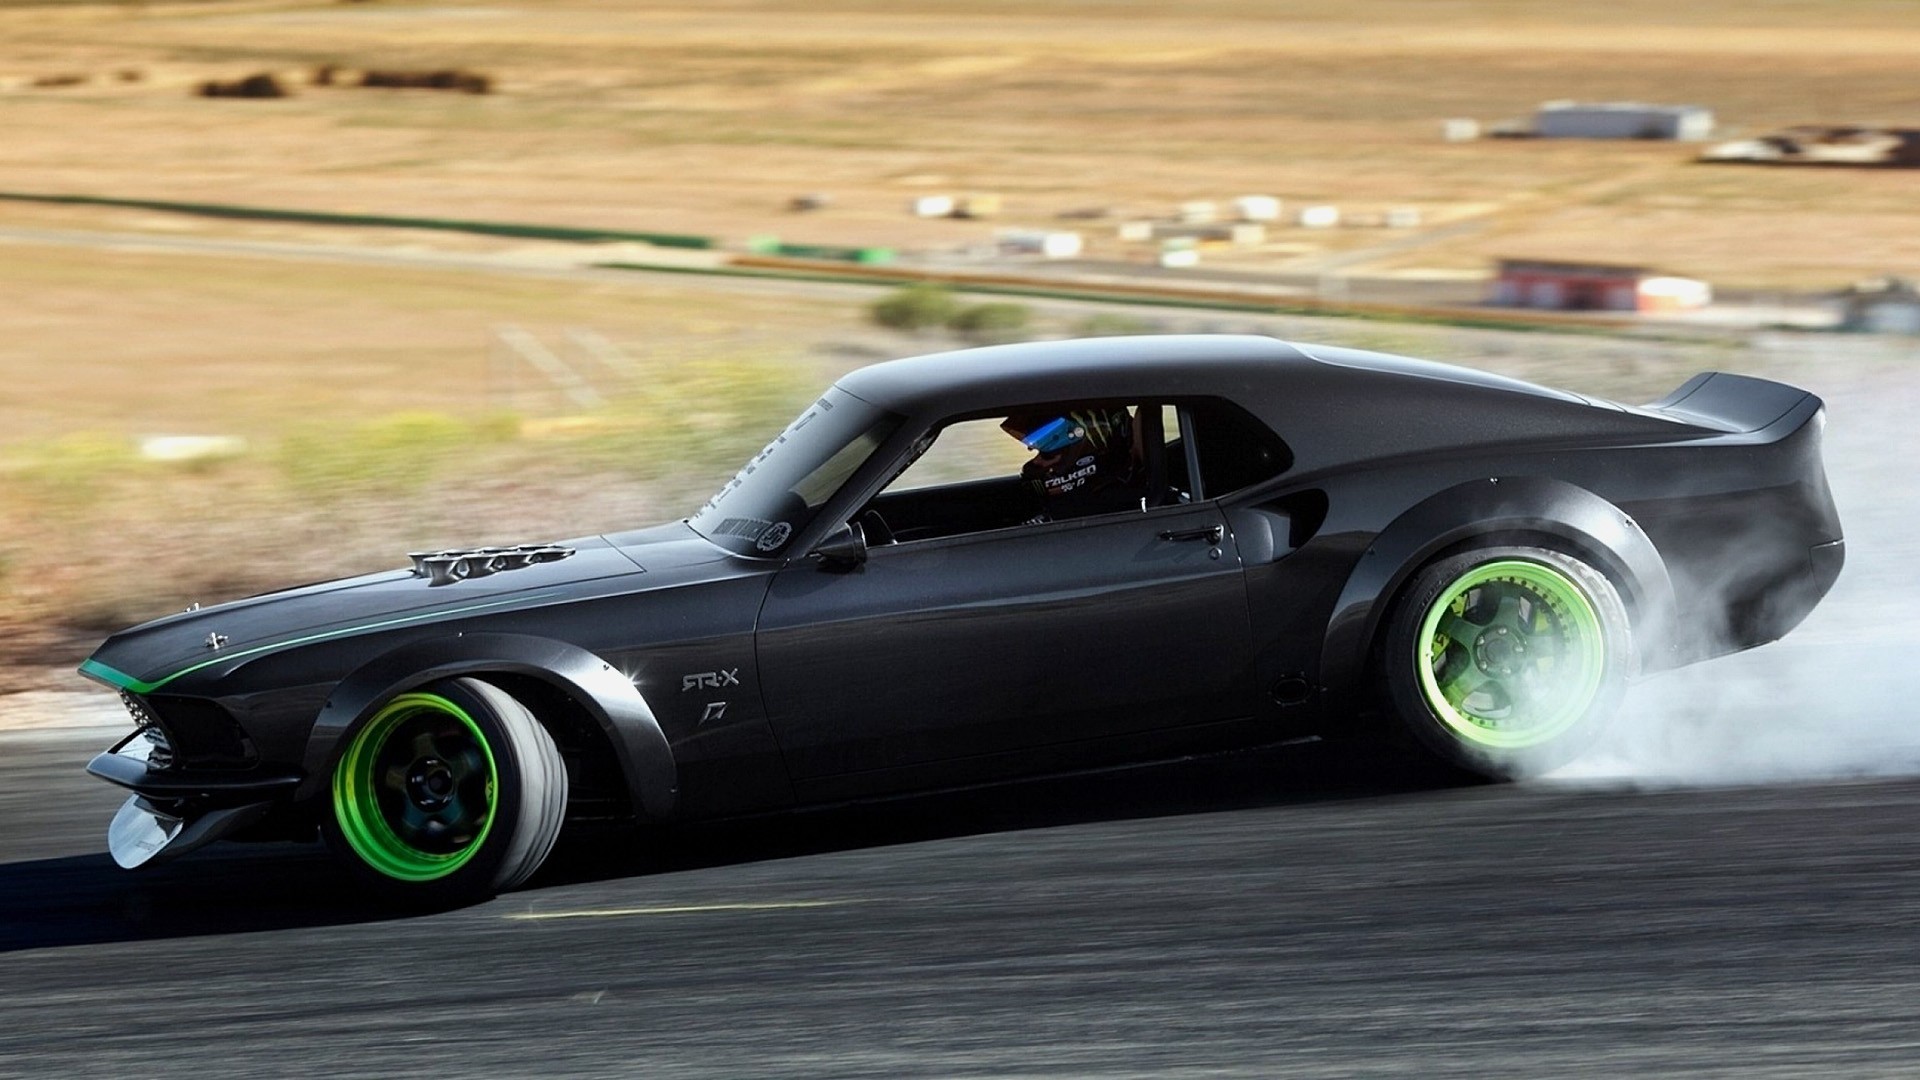 General 1920x1080 Ford Mustang drift car Ford black cars vehicle